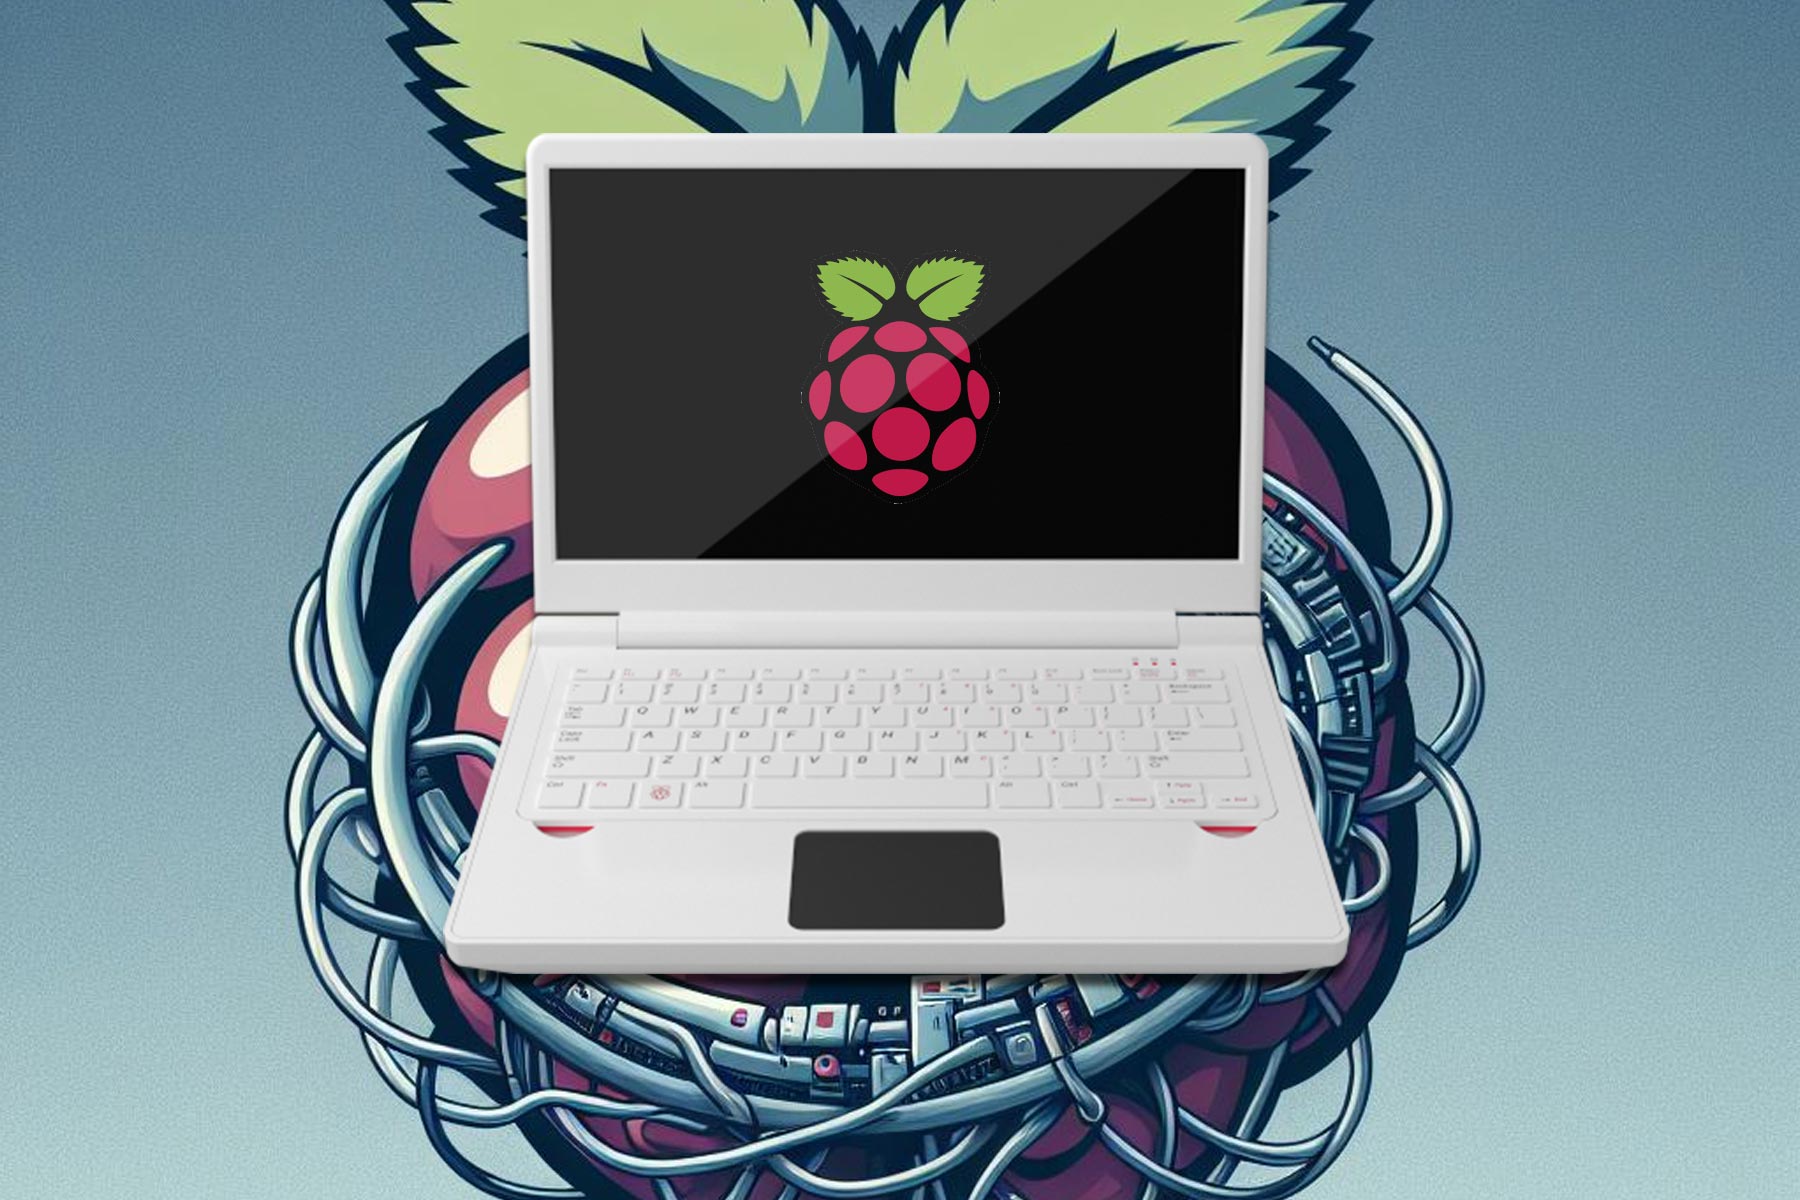 Want to convert Raspberry Pi into a notebook? PiDock 400 has your back